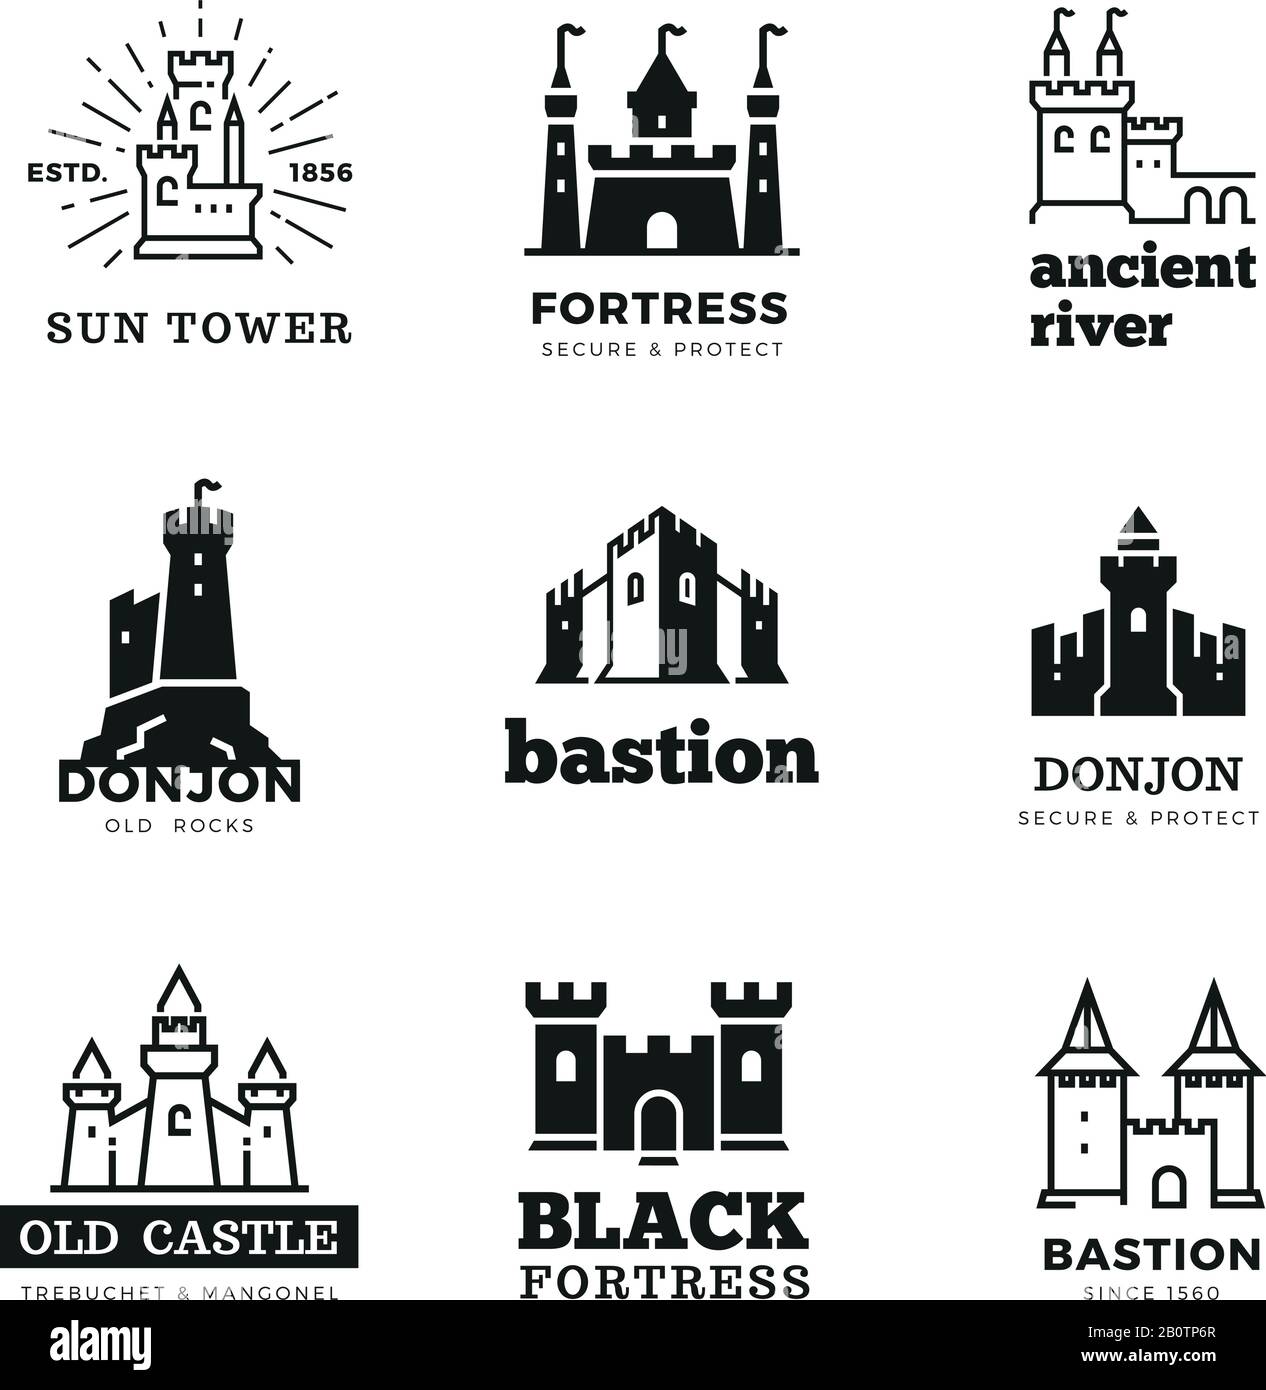 Medieval castle and knight fortress vector ancient royal logo set. Fairytale fortress logo, historical royal building citadel illustration Stock Vector